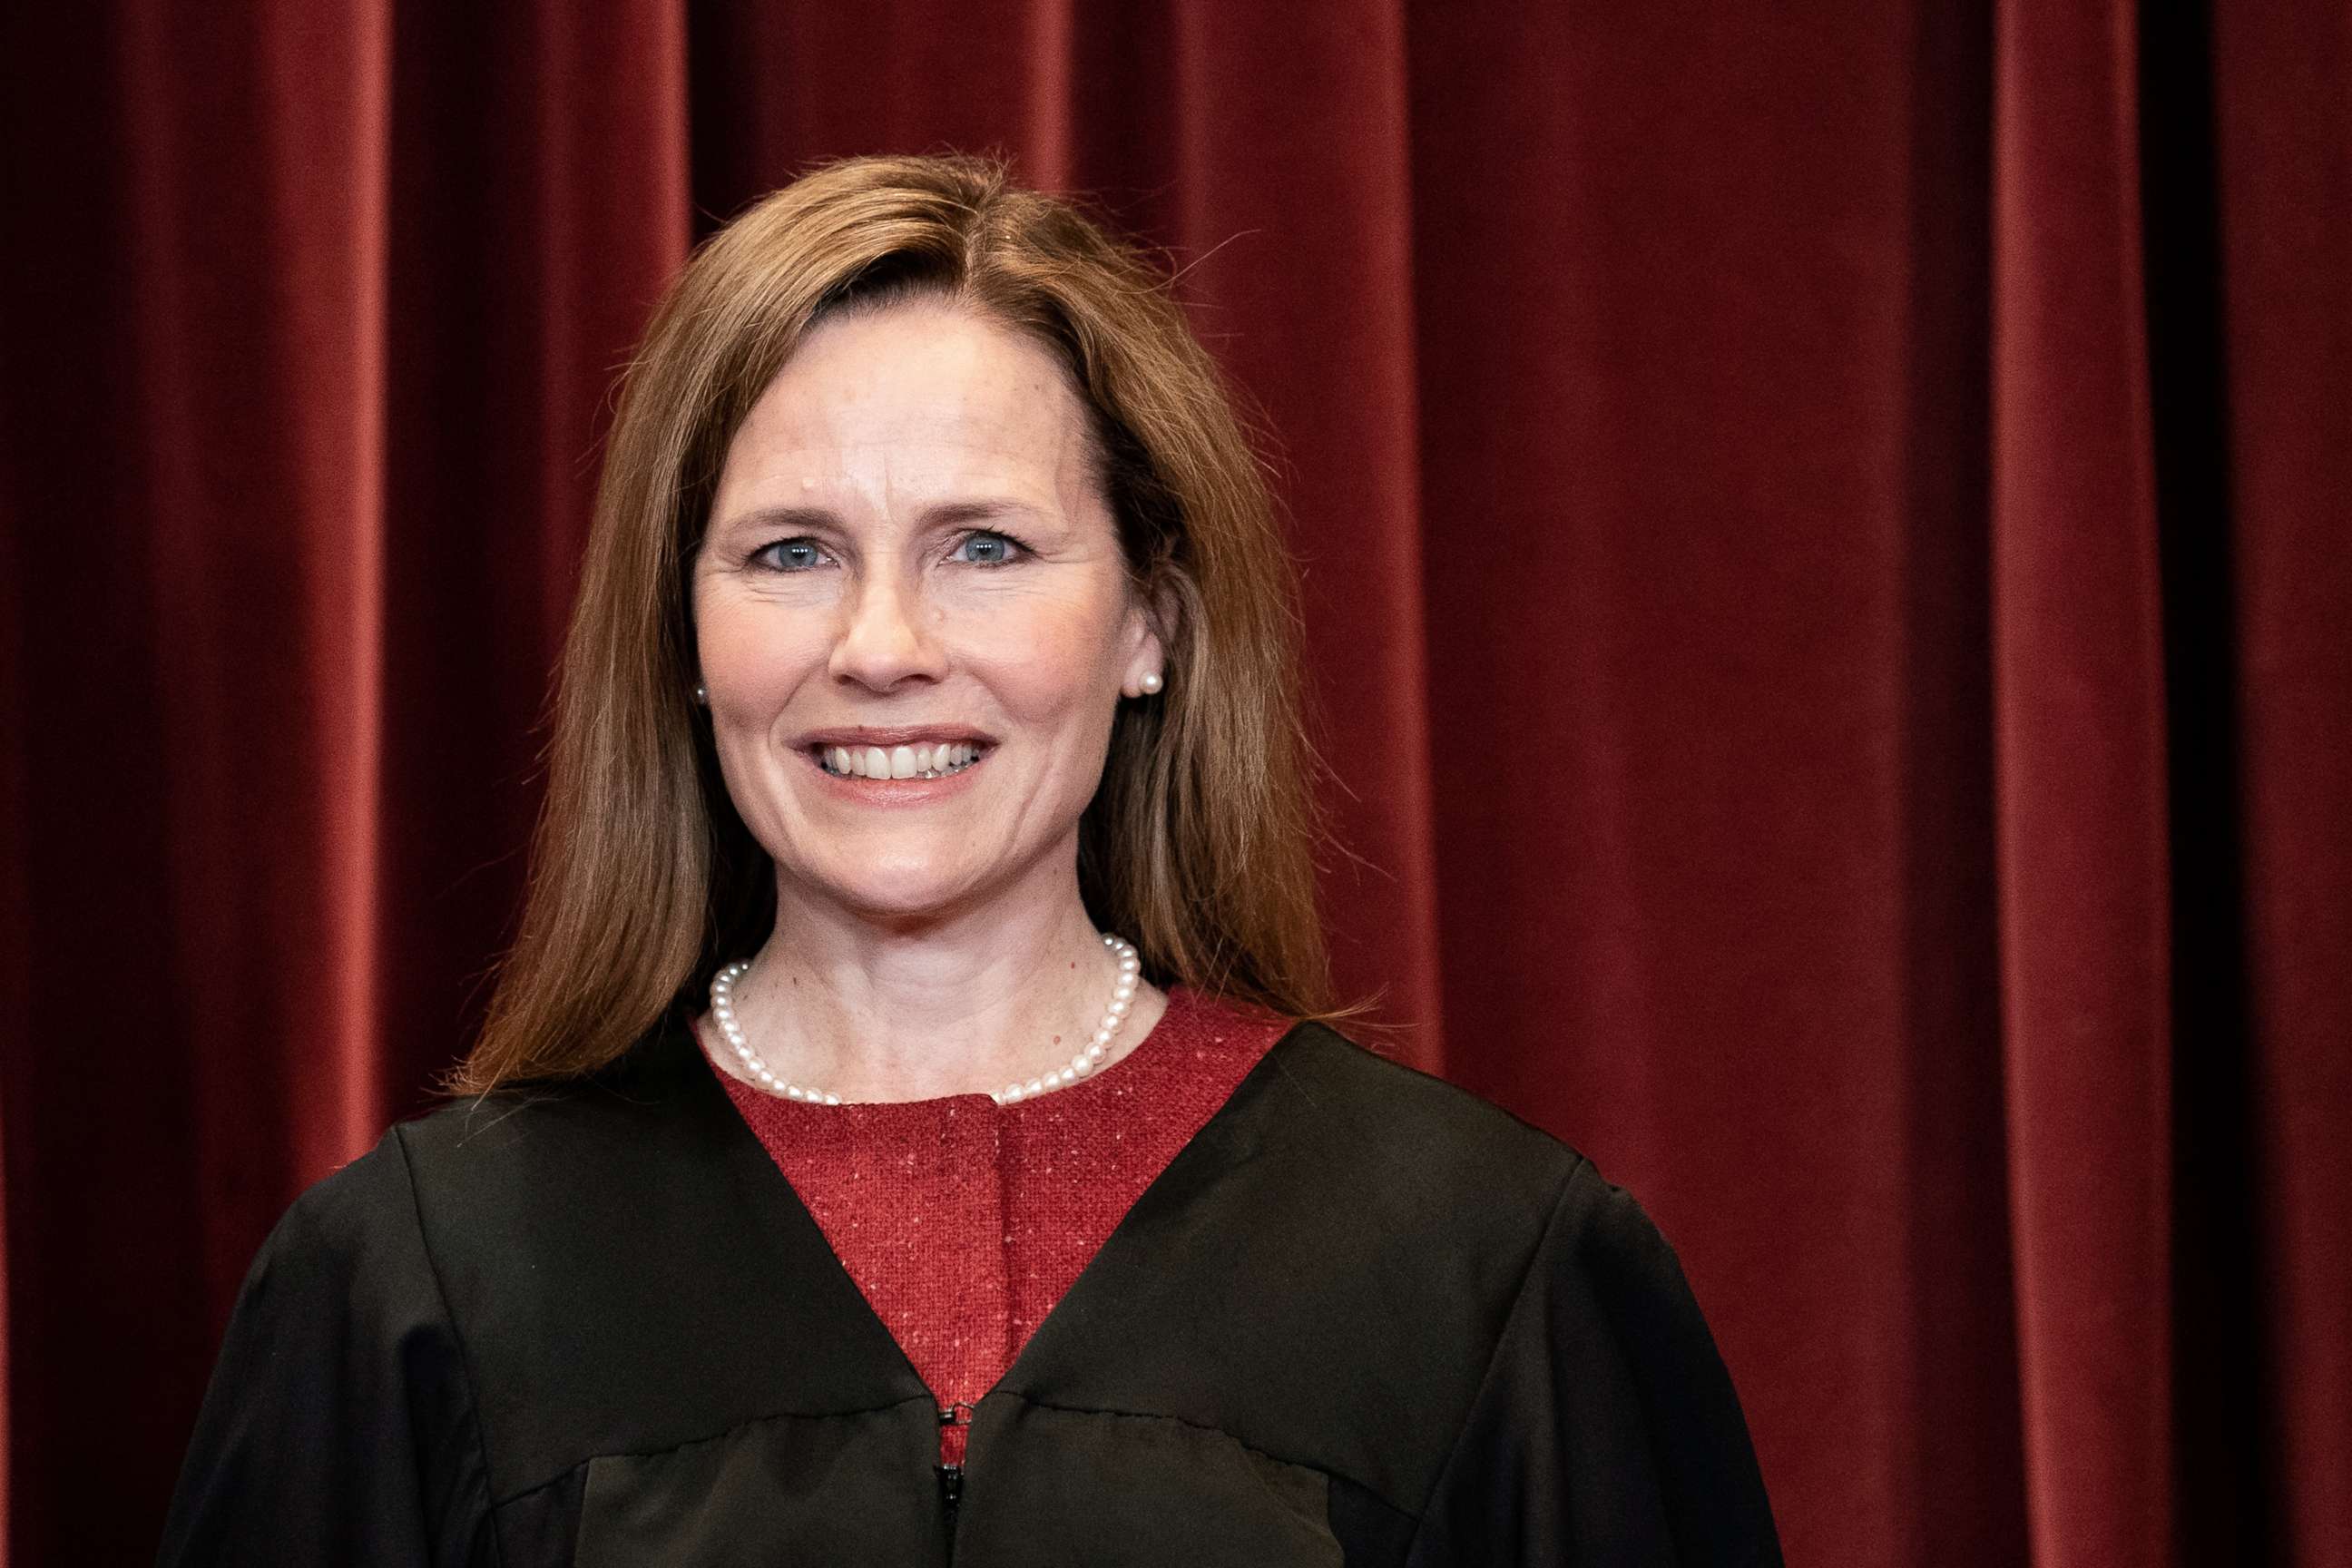 PHOTO: Associate Justice Amy Coney Barrett stands during a group photo of the Justices at the Supreme Court in Washington, D.C., April 23, 2021.